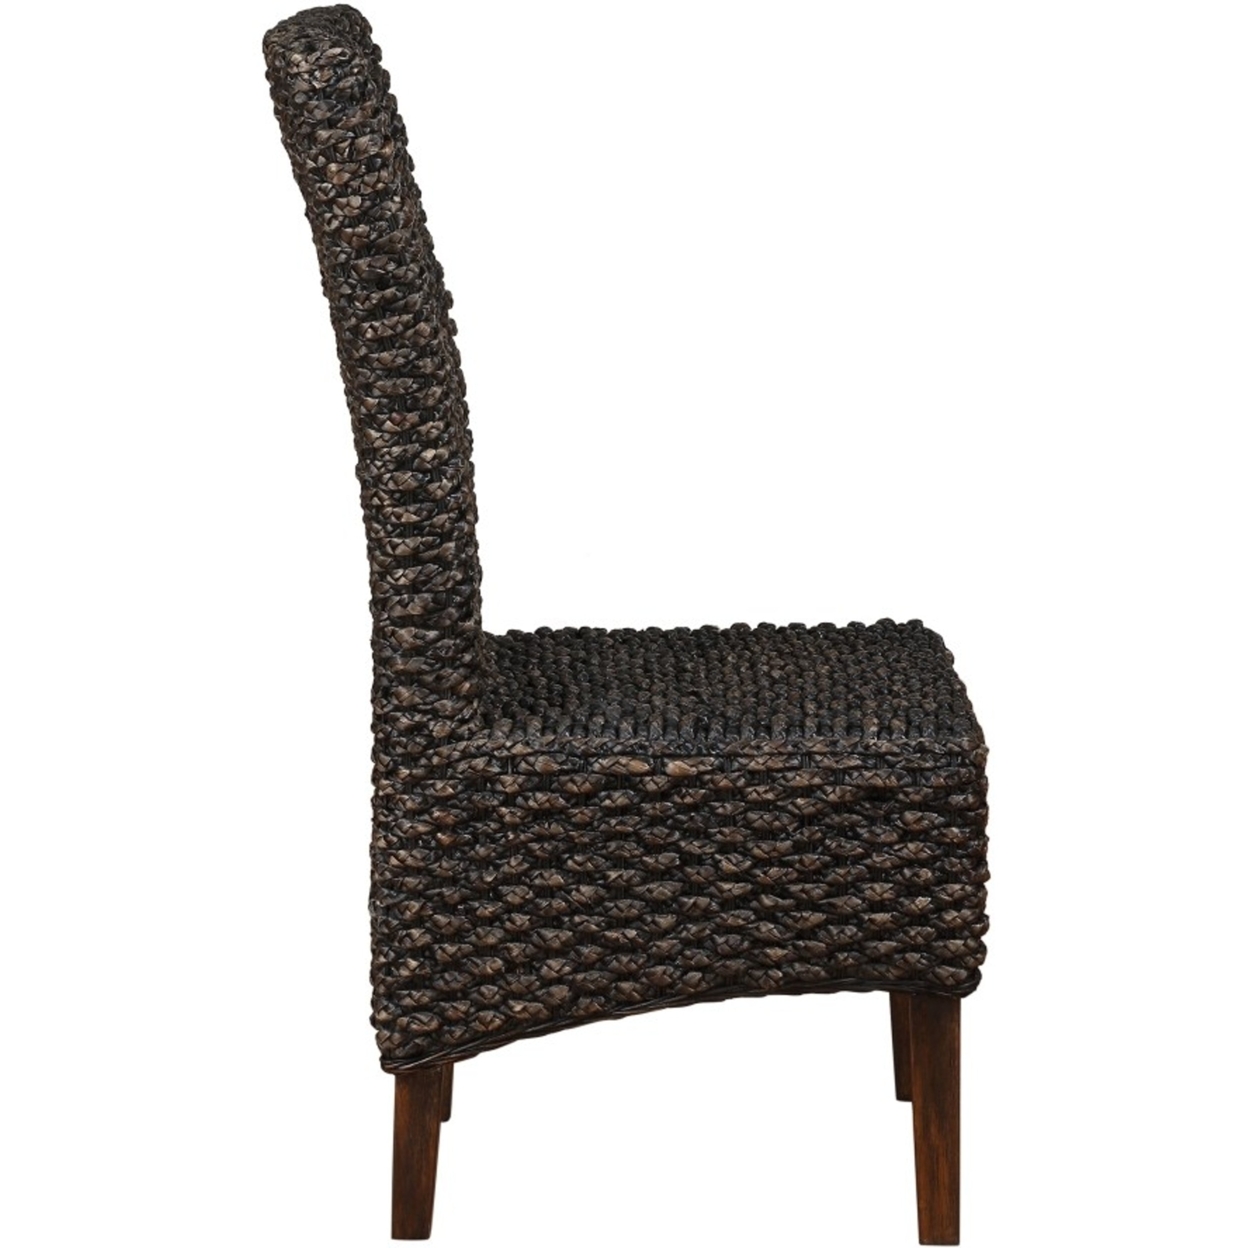 Wicker Woven Wooden Chair With High Back, Set Of 2, Brown- Saltoro Sherpi